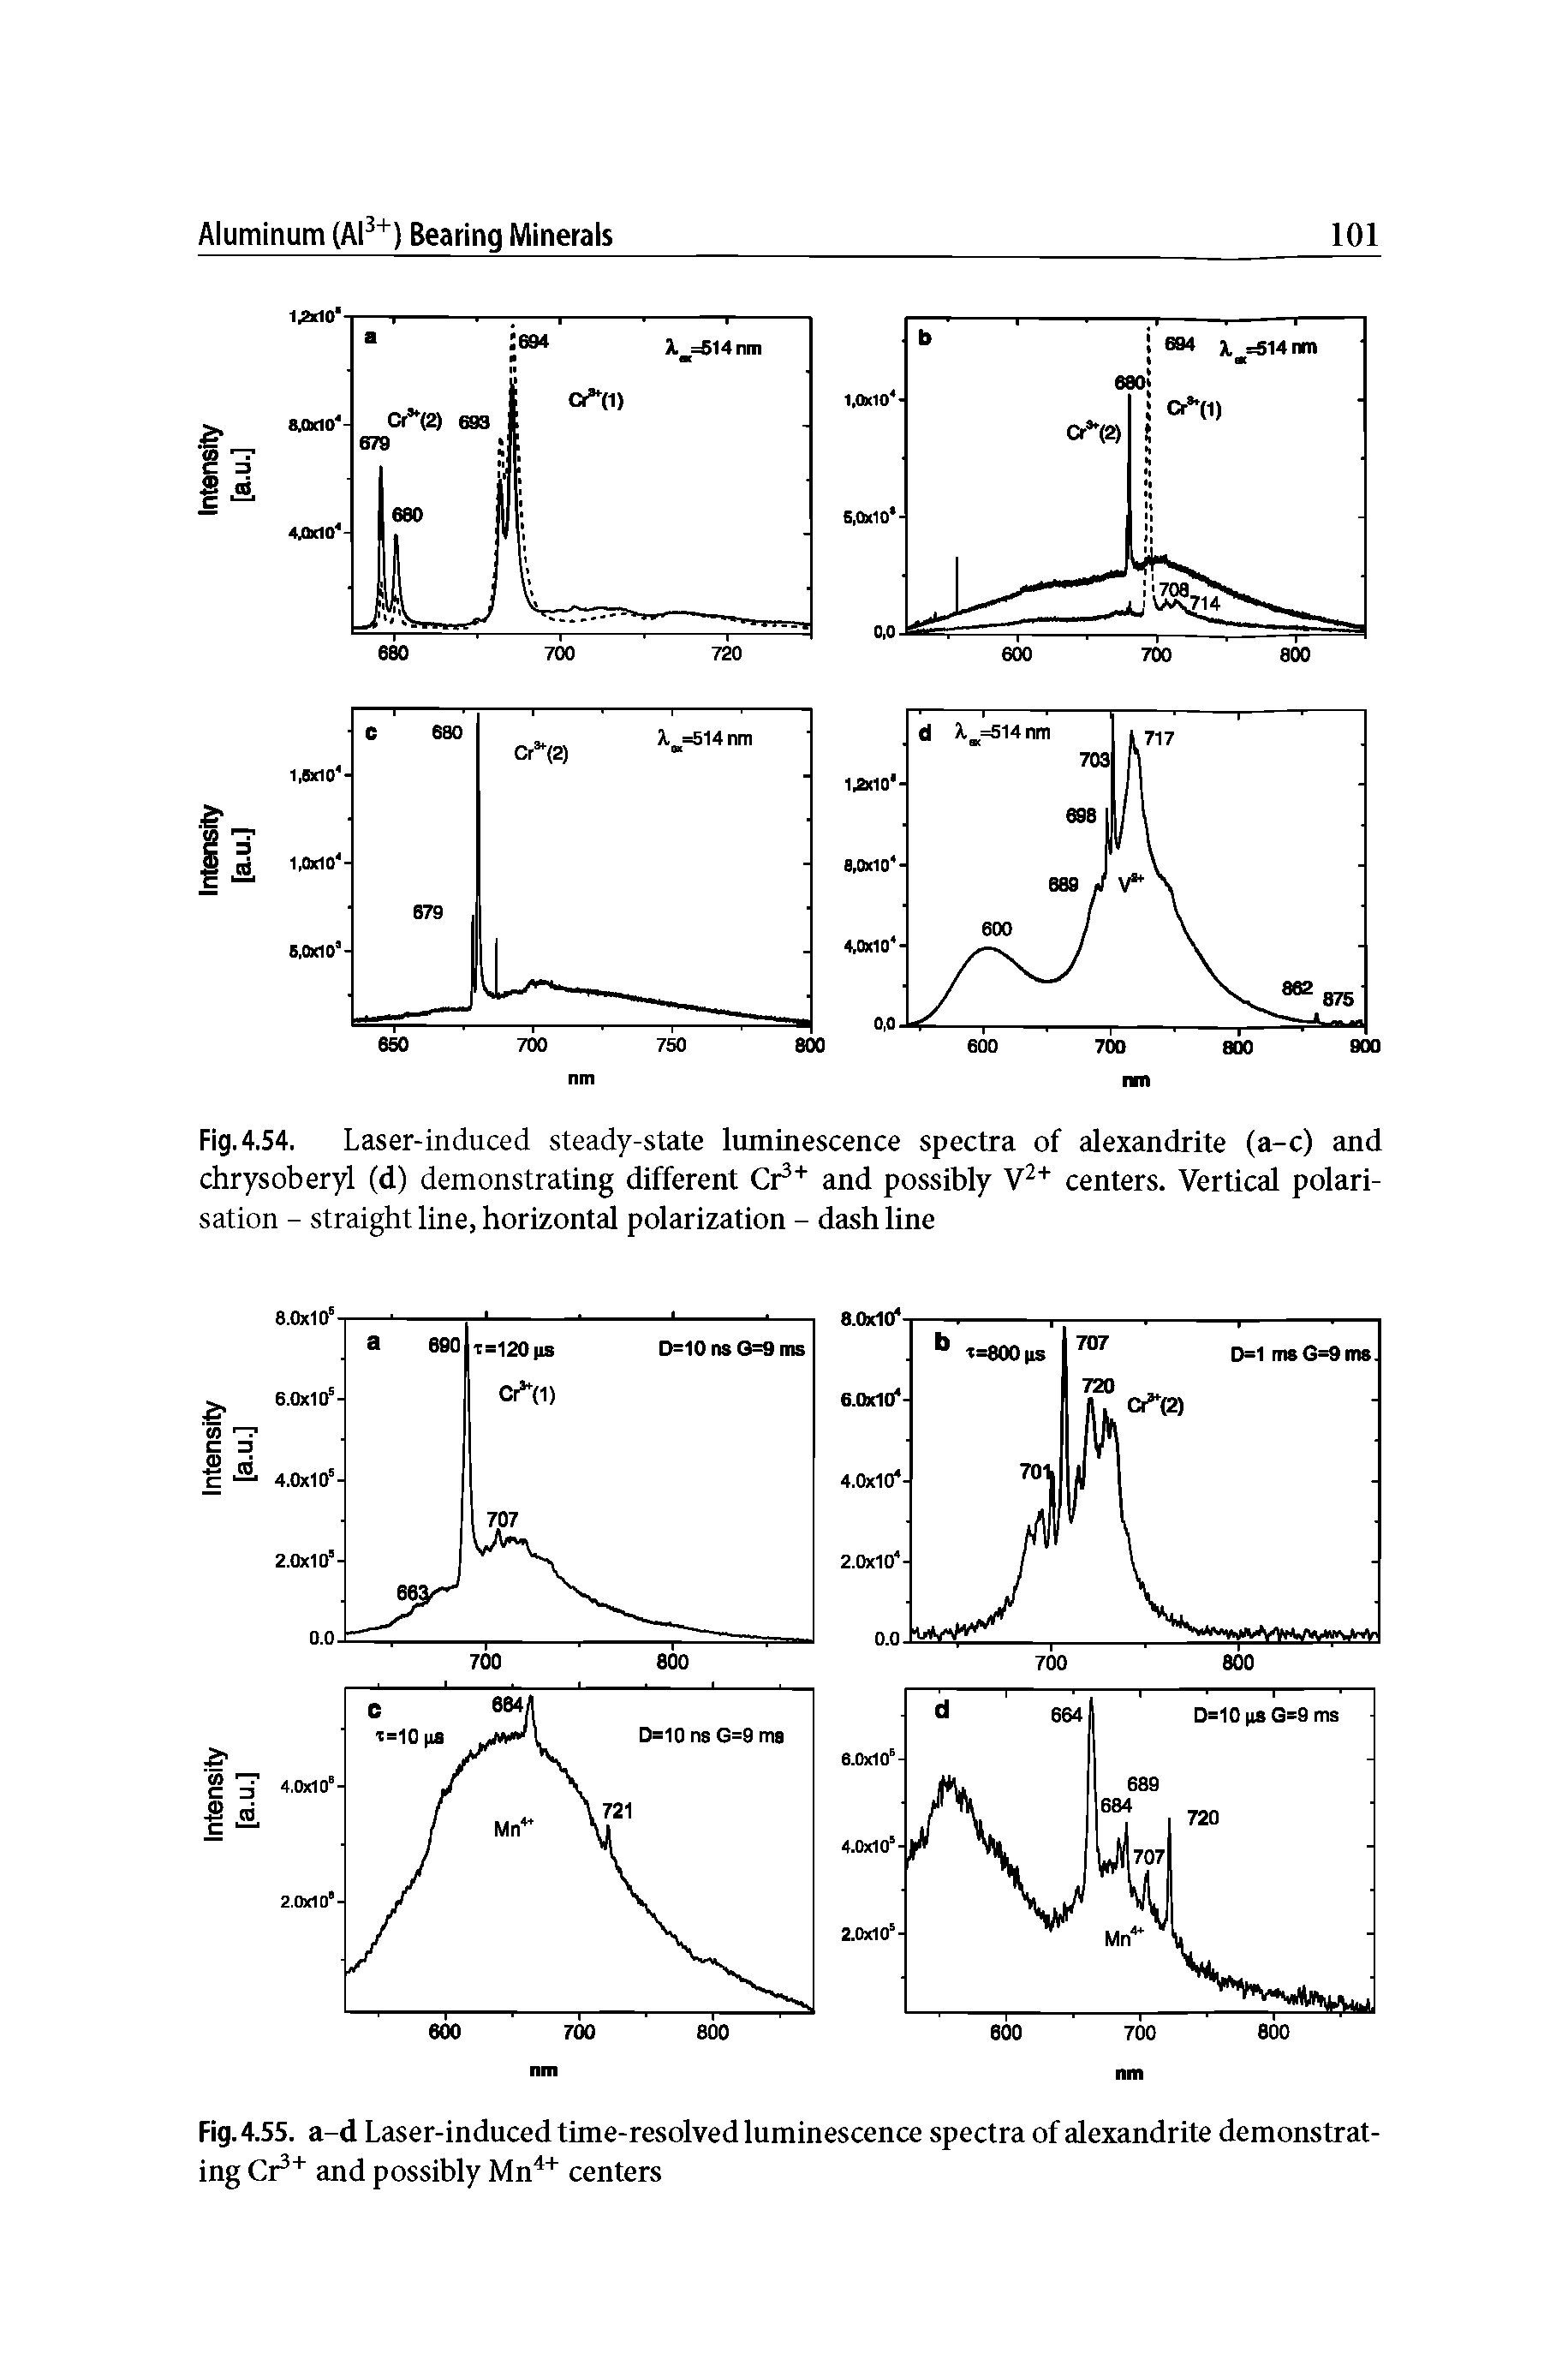 Fig. 4.54. Laser-induced steady-state luminescence spectra of alexandrite (a-c) and chrysoberyl (d) demonstrating different Cr and possibly V centers. Vertical polarisation - straight line, horizontal polarization - dash line...